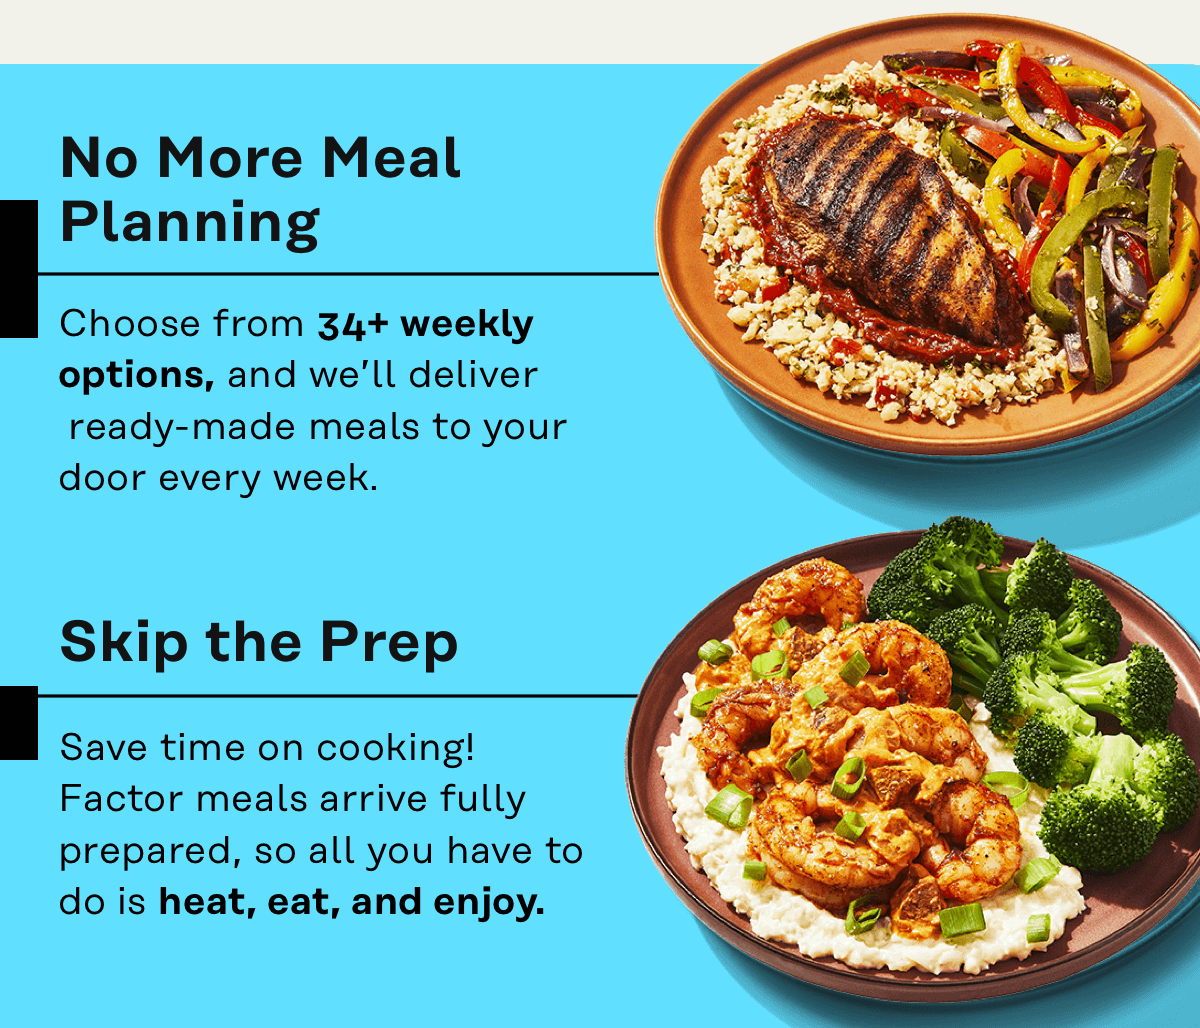 No more meal planning, choose from 34+ weekly options and we'll deliver ready-made mealds to your door every week